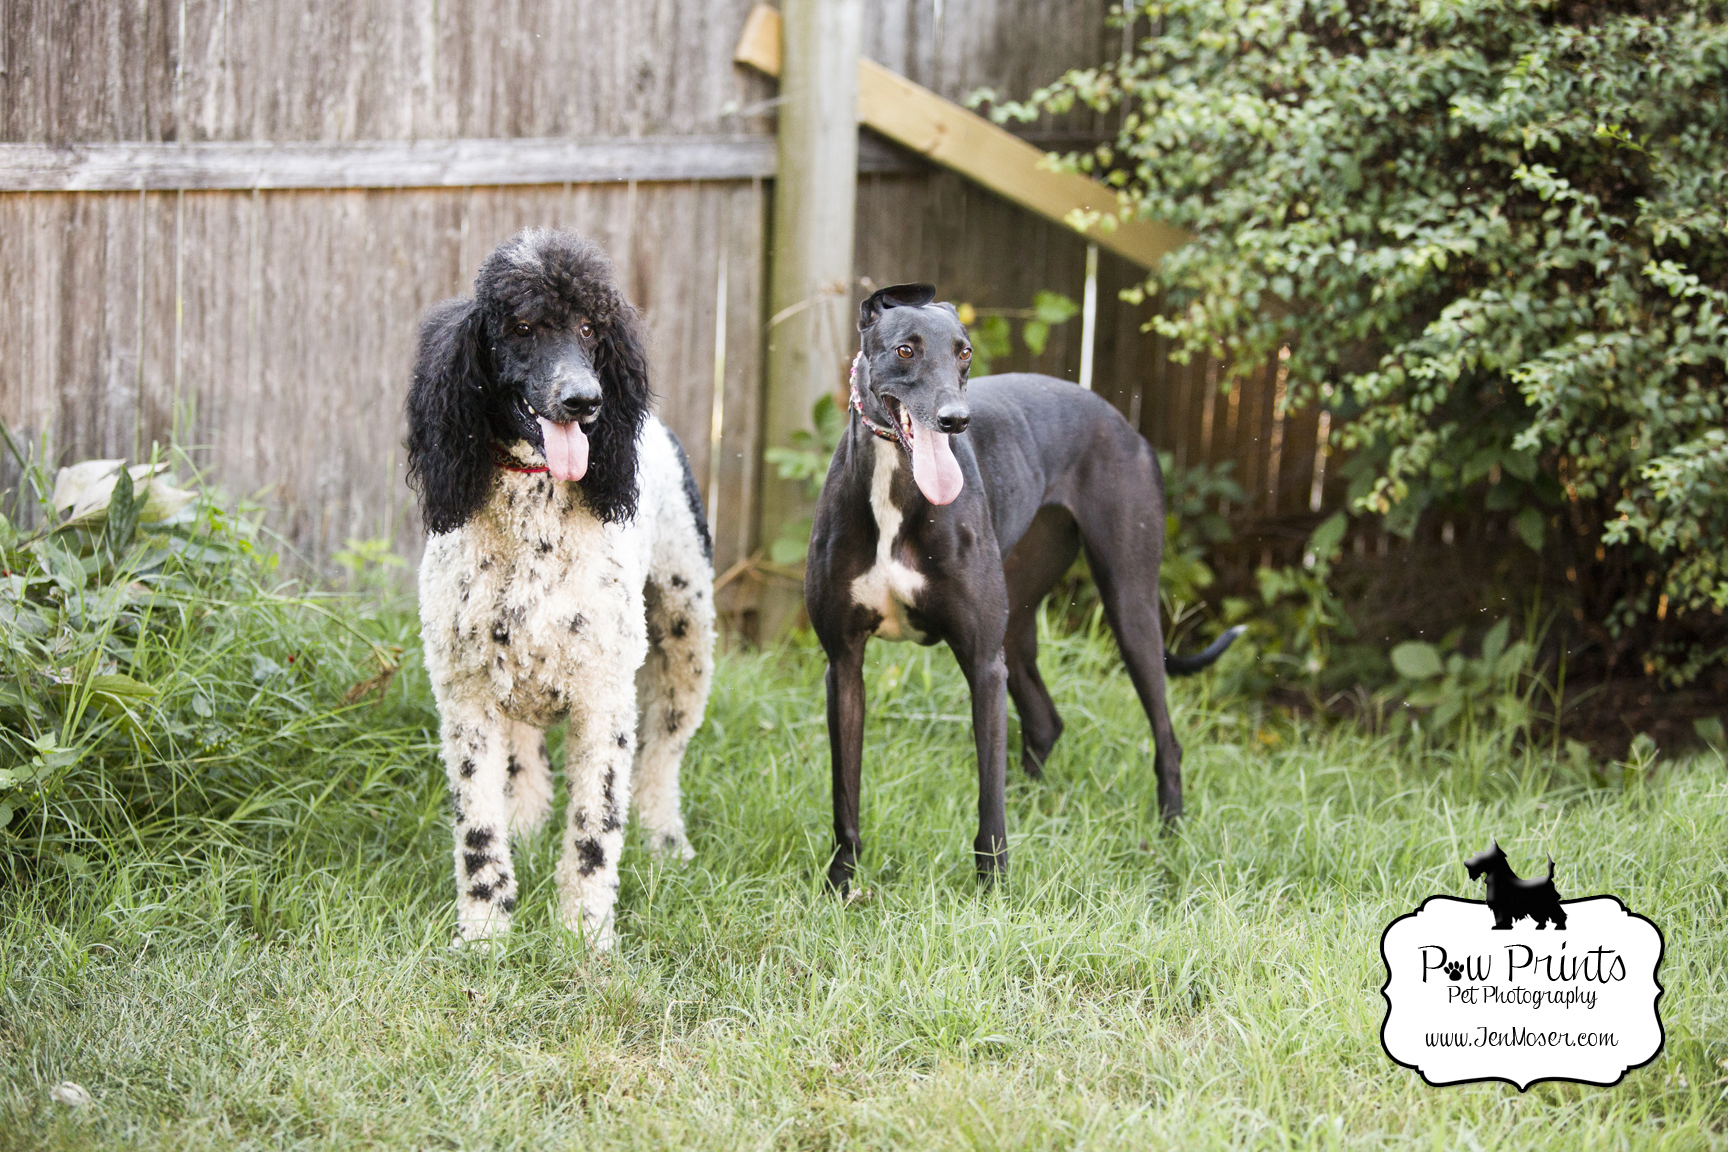 black and white poodle chance and greyhound asia